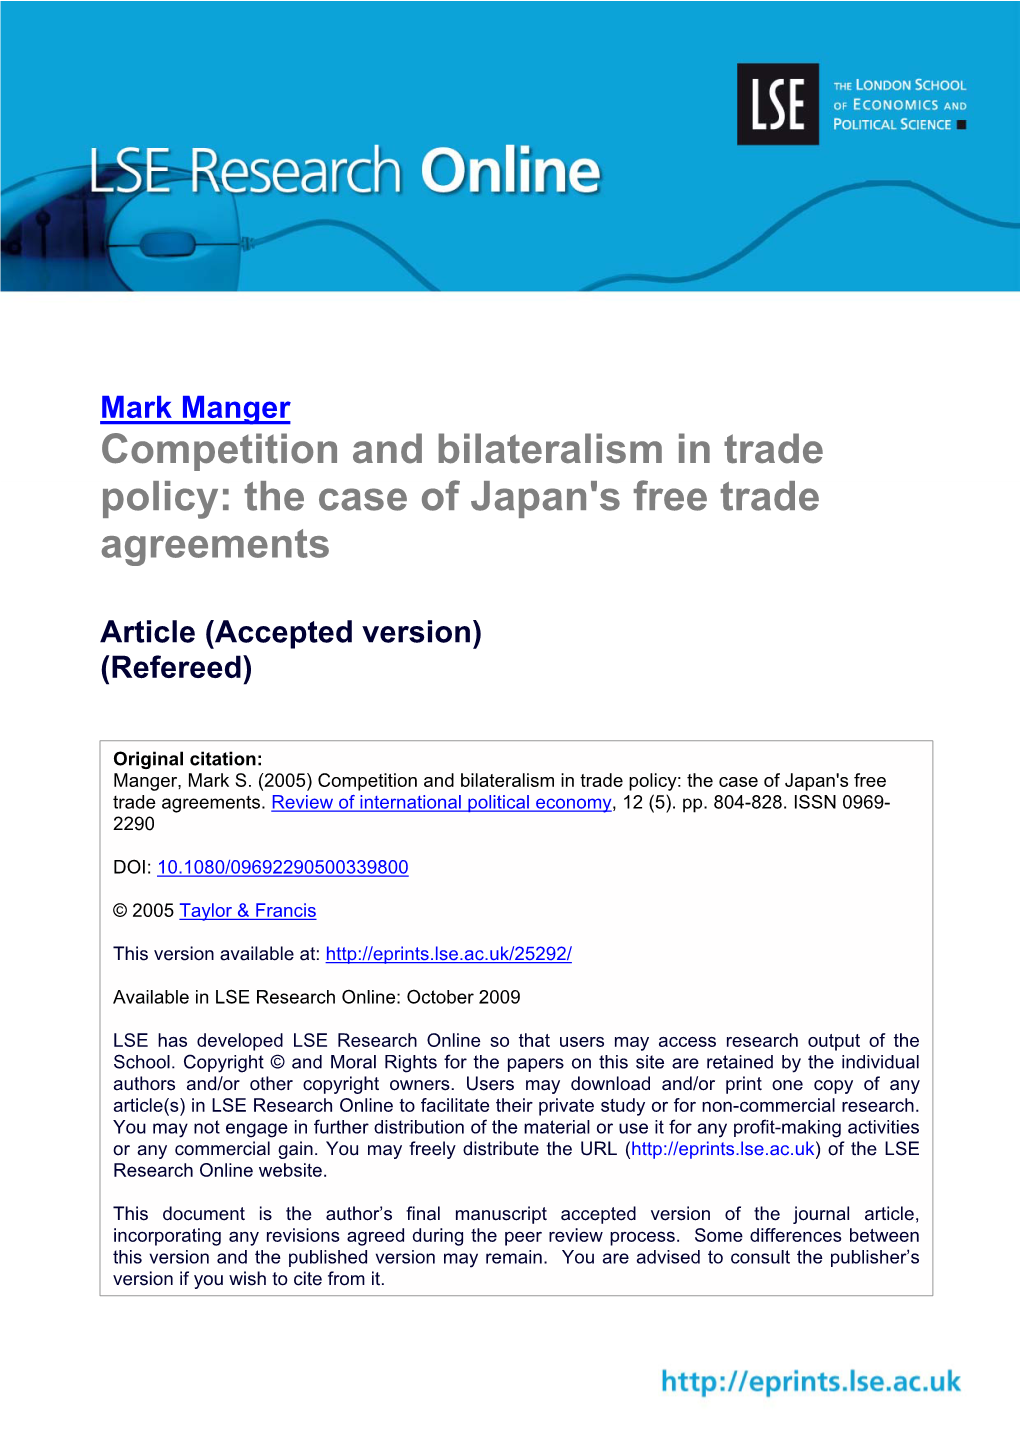 Competition and Bilateralism in Trade Policy: the Case of Japan's Free Trade Agreements